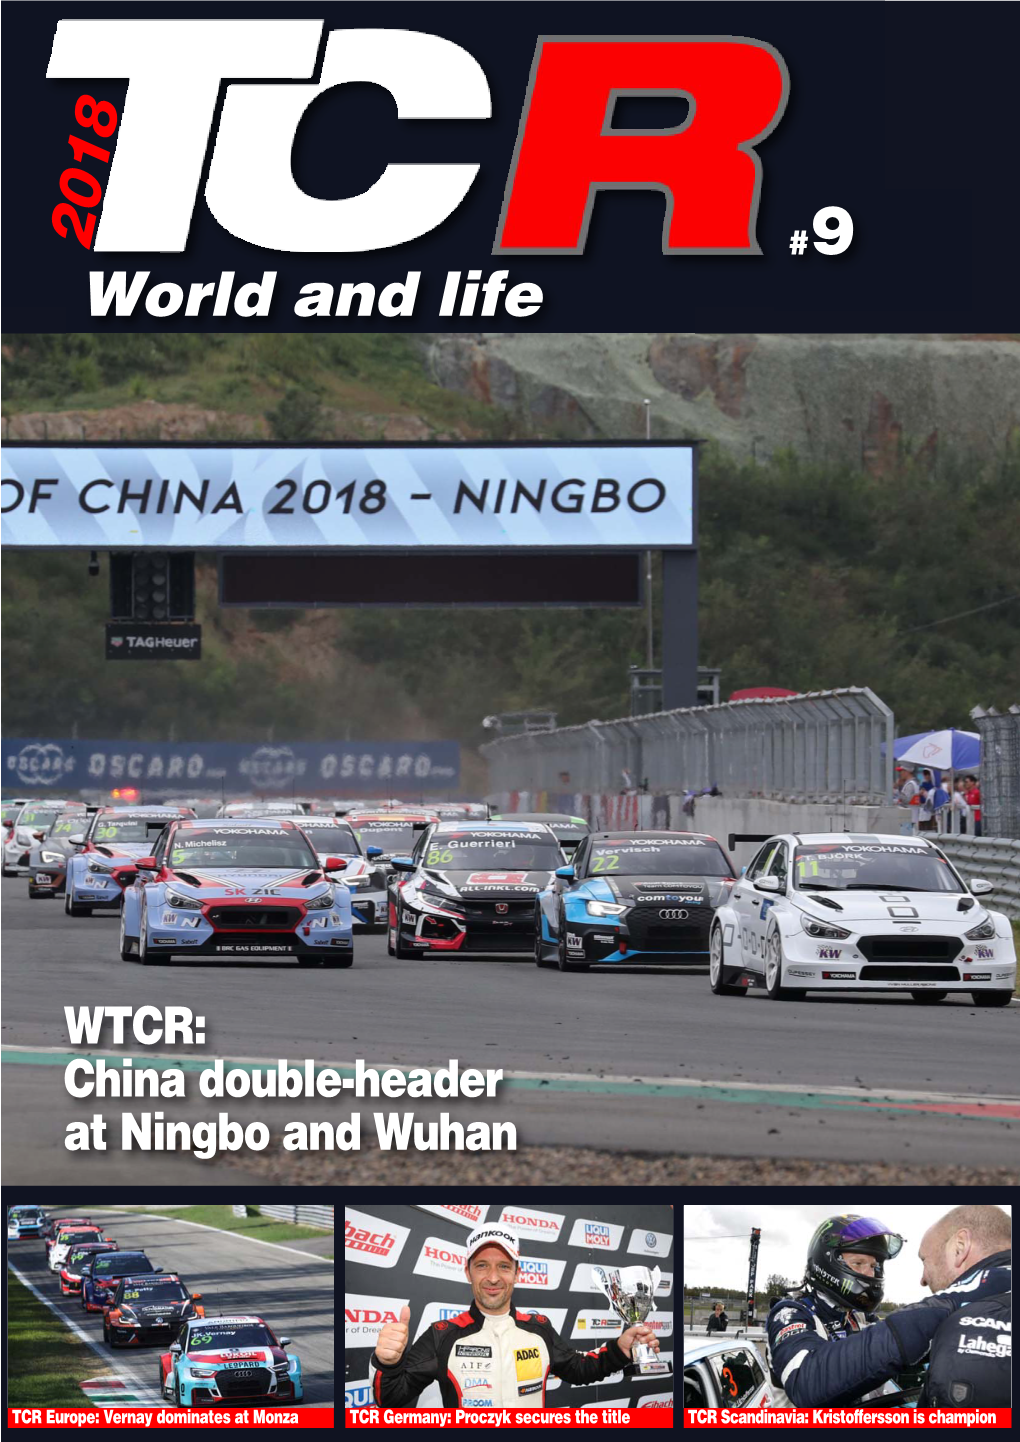 WTCR: China Double-Header at Ningbo and Wuhan